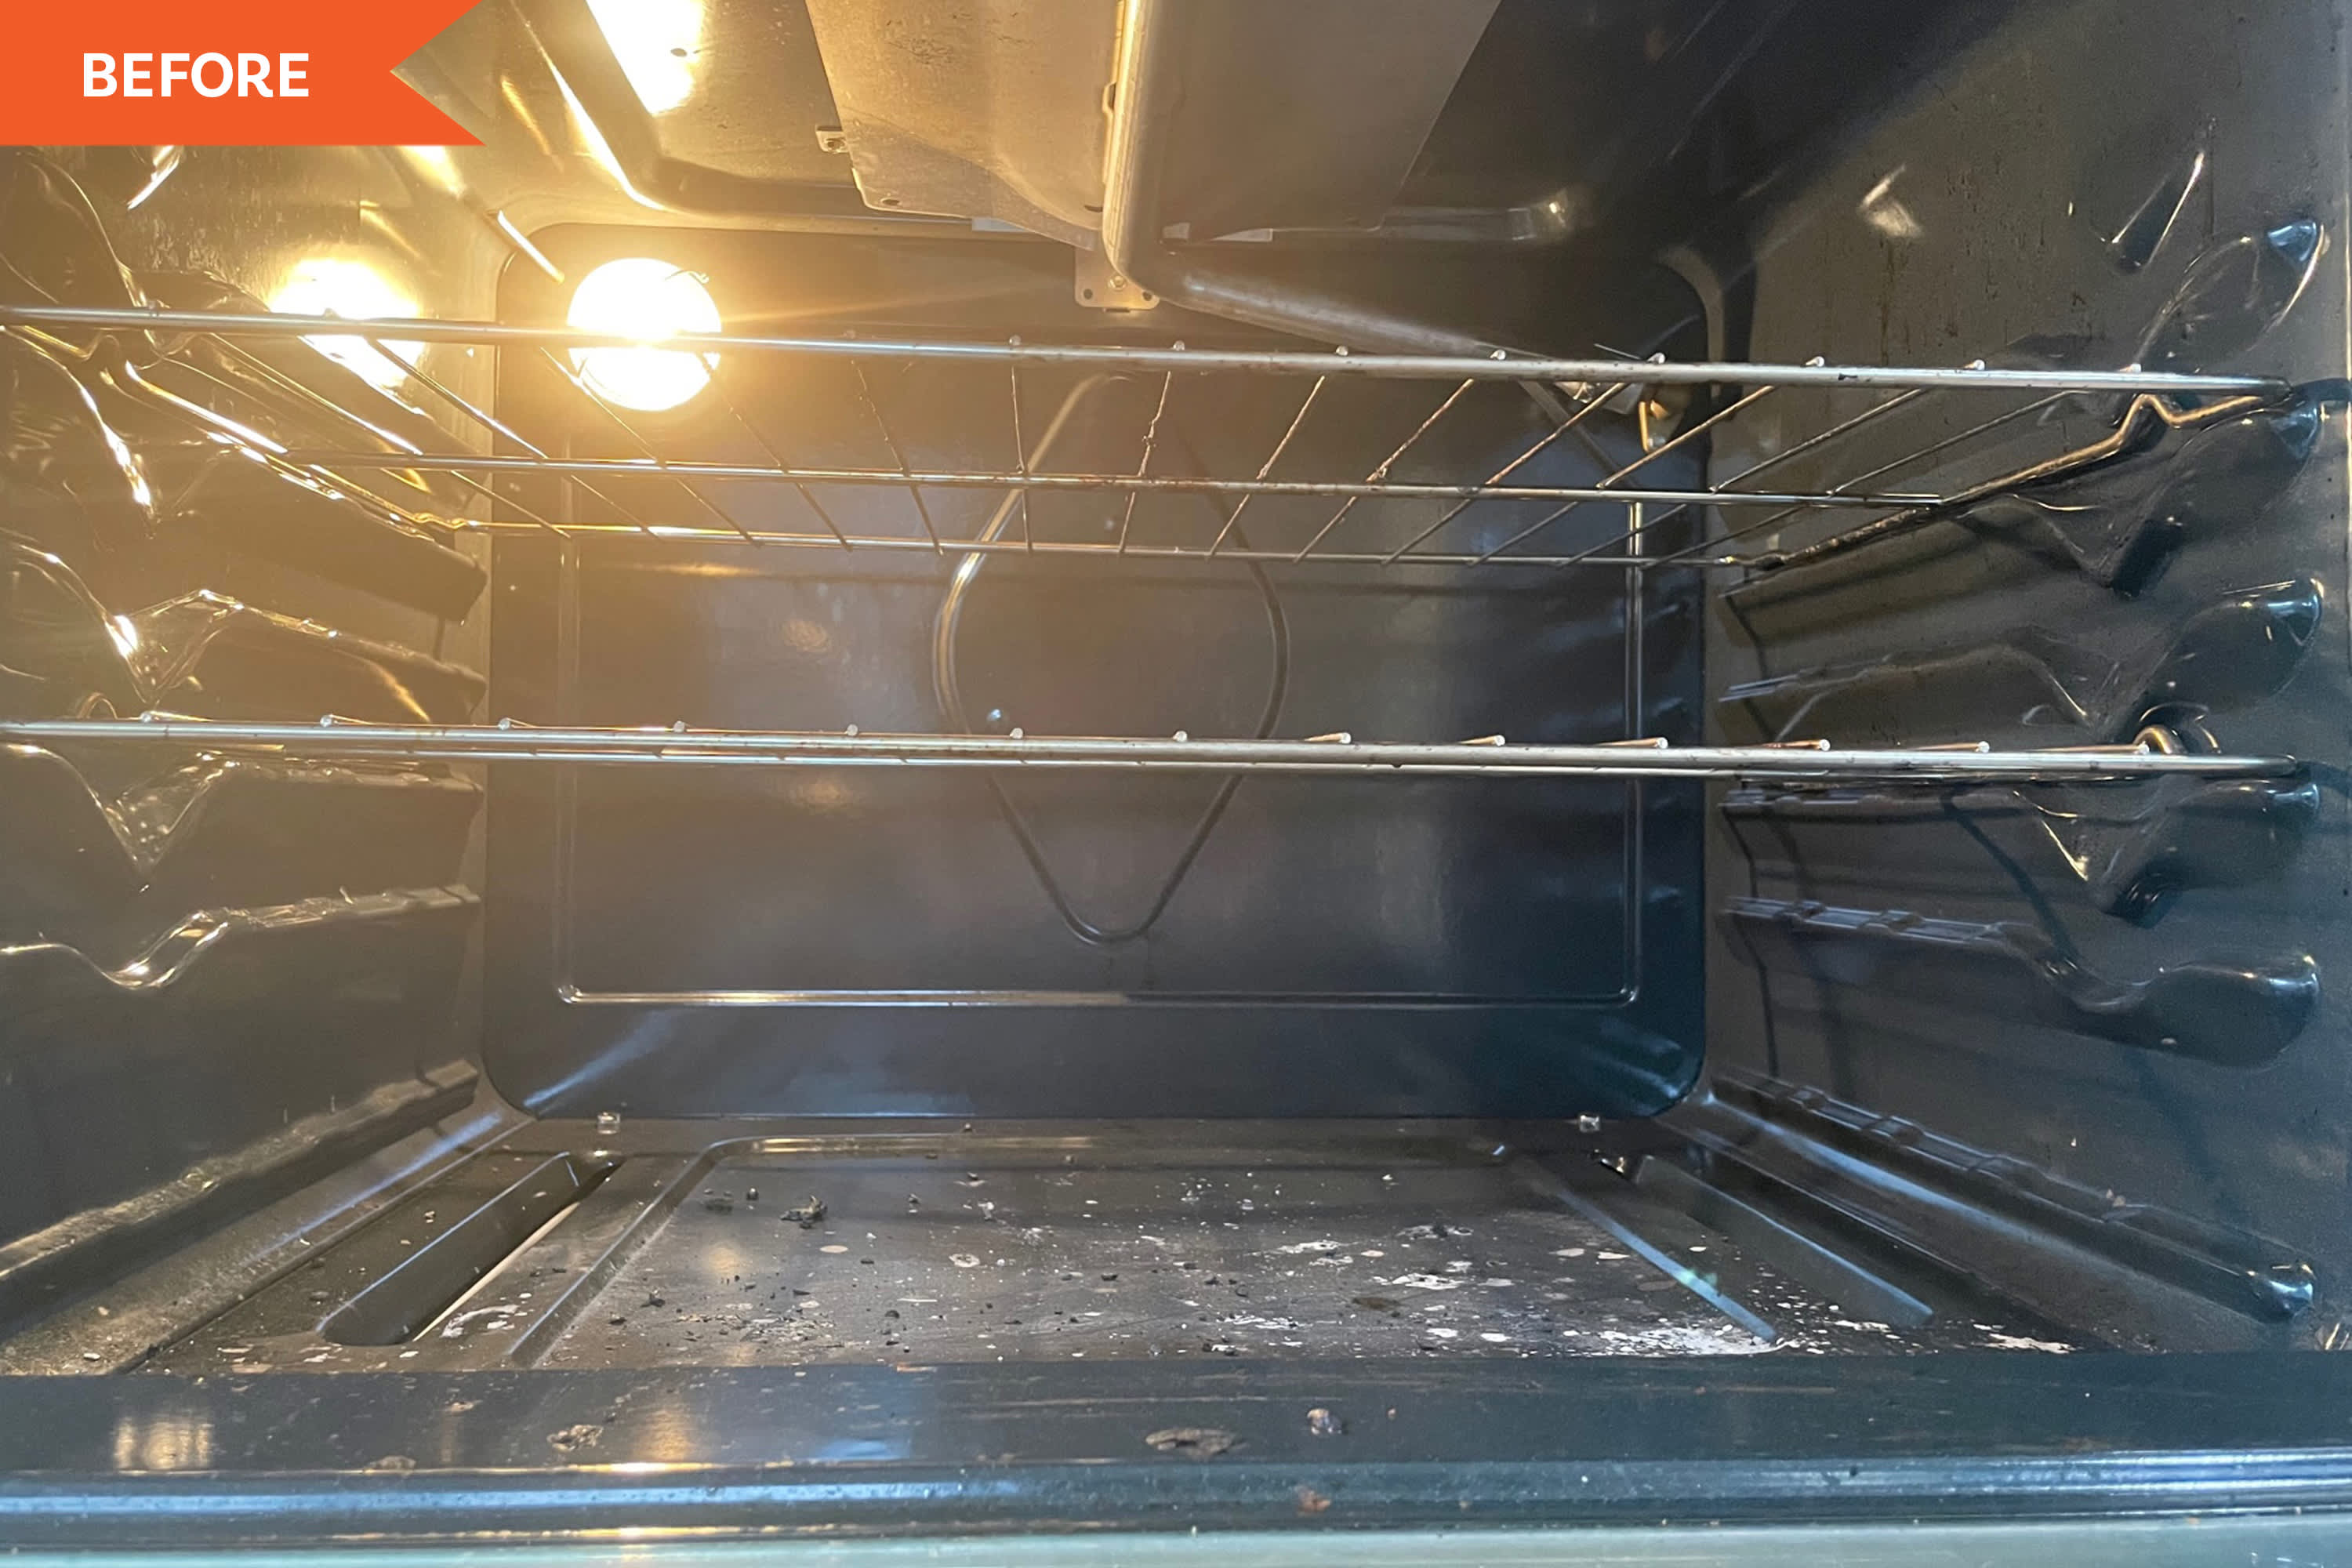 https://cdn.apartmenttherapy.info/image/upload/v1641500398/k/Edit/2022-01-Scrub-Daddy-Oven-Paste/Stove-before-cleaning.jpg